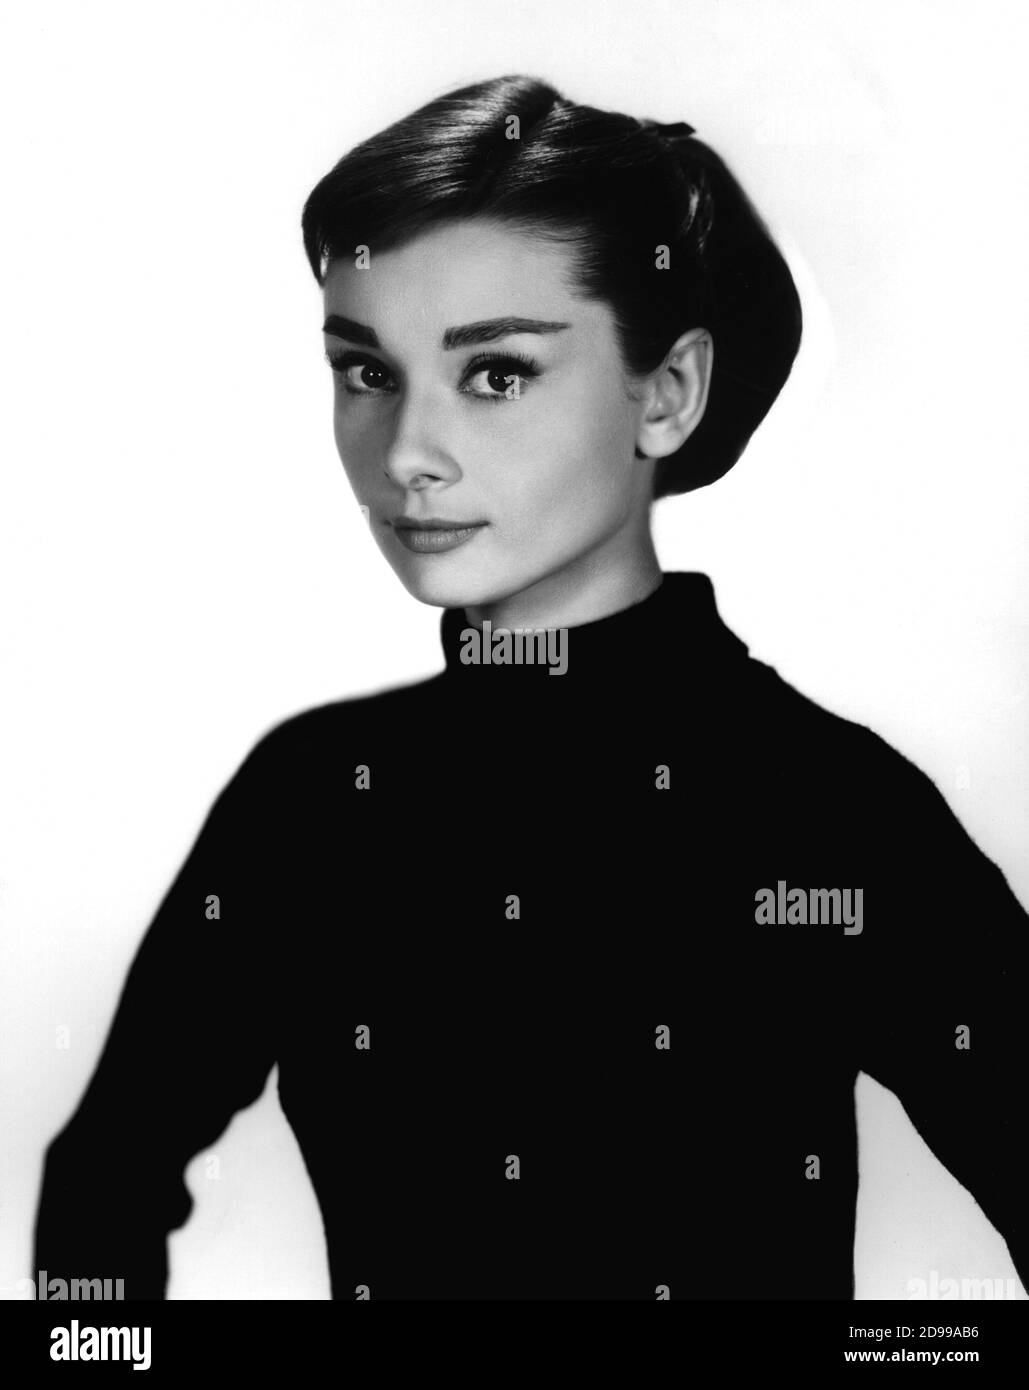 1954 :The movie actress AUDREY HEPBURN in SABRINA by Billy Wilder - COMEDY - DIVA - DIVINA - NOT FOR PUBBLICITY USE - NOT FOR ADVERTISING USE - NOT FOR GADGETS USE - NON PER USO PUBBLICITARIO - NON PER GADGETS   ----  Archivio GBB Stock Photo